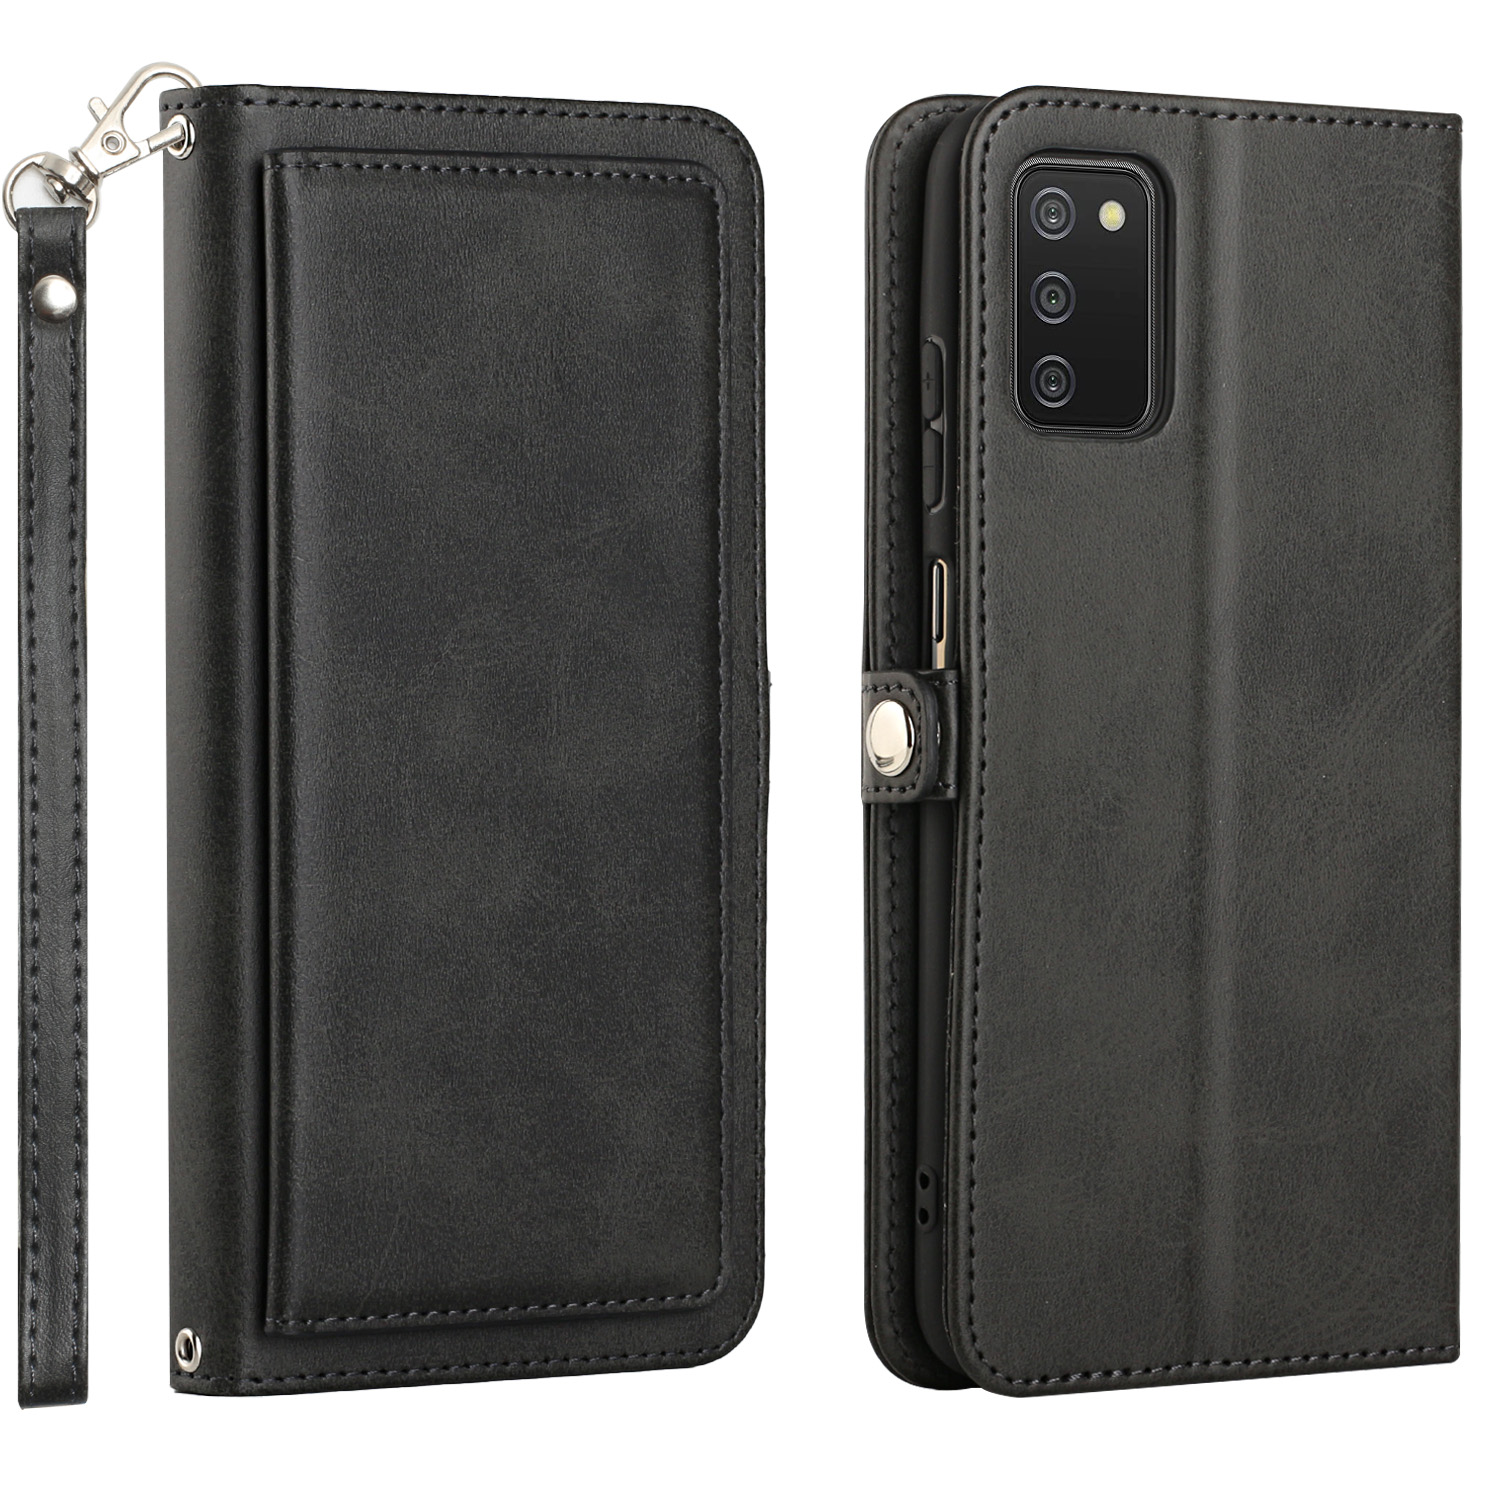 Premium PU Leather Folio WALLET Front Cover Case for Galaxy A02s (Black)